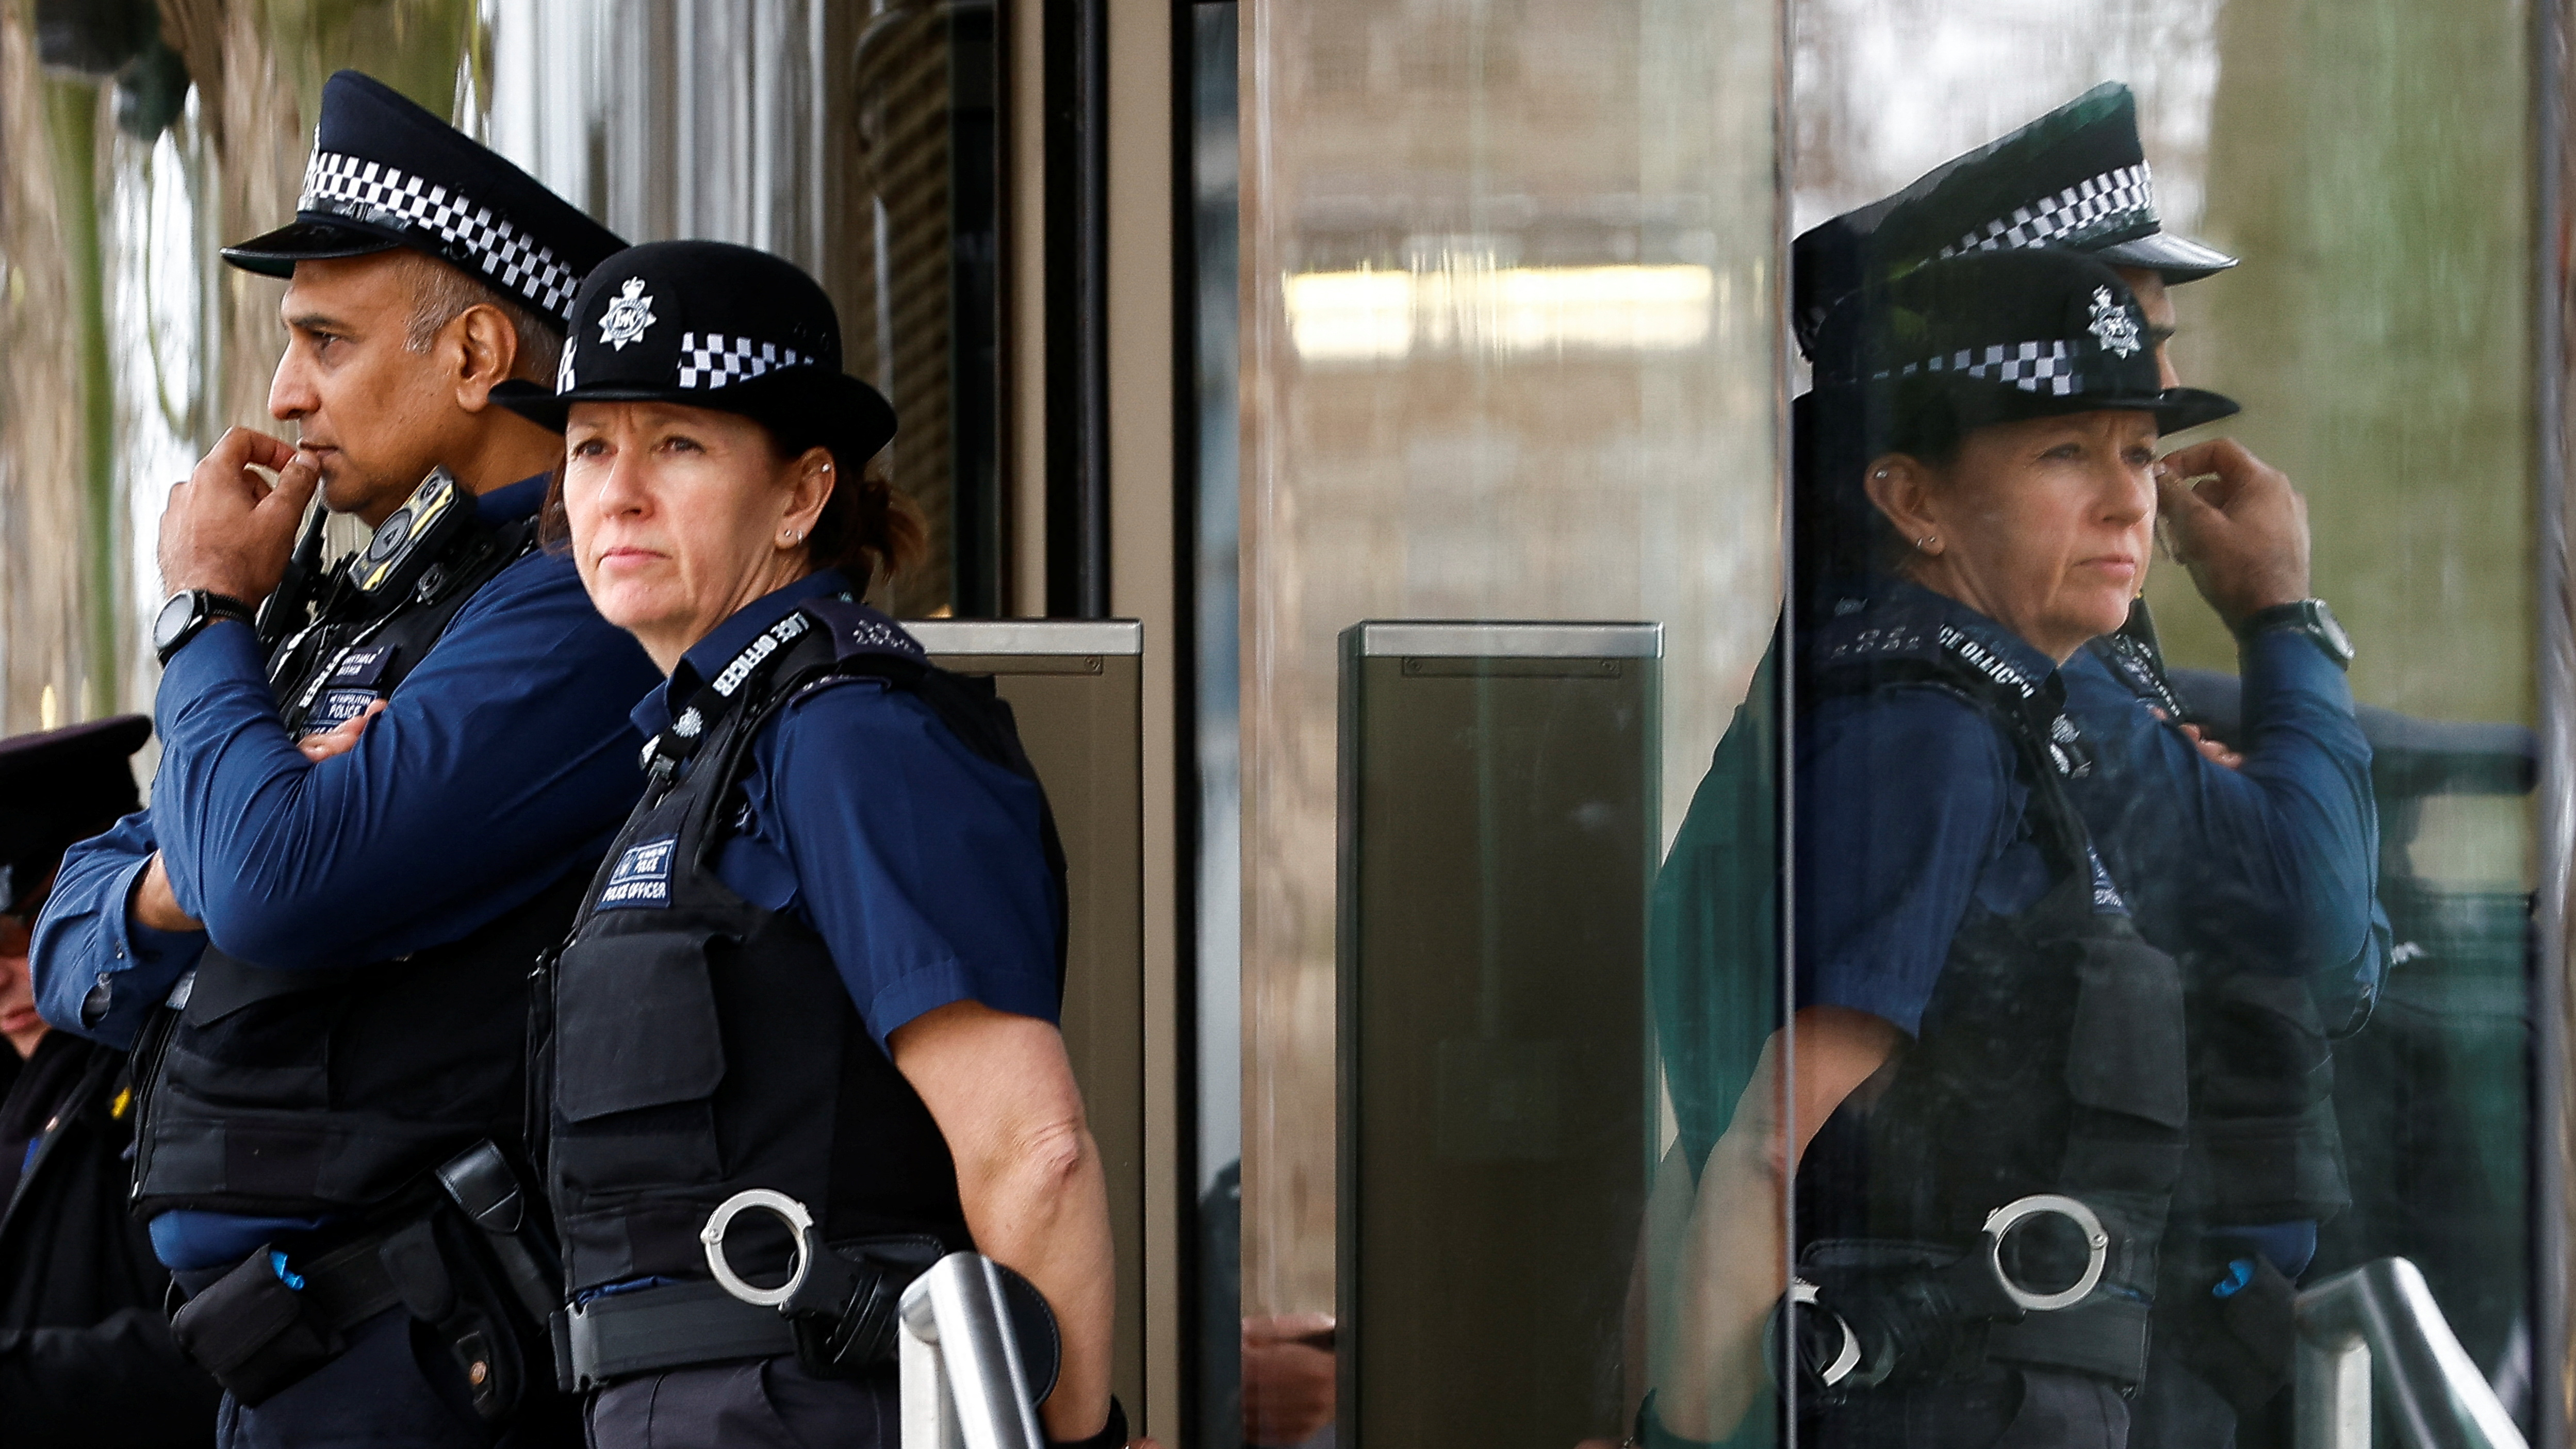 The report accuses the Metropolitan Police of being institutionally racist, sexist and homophobic. /Peter Nicholls/Reuters